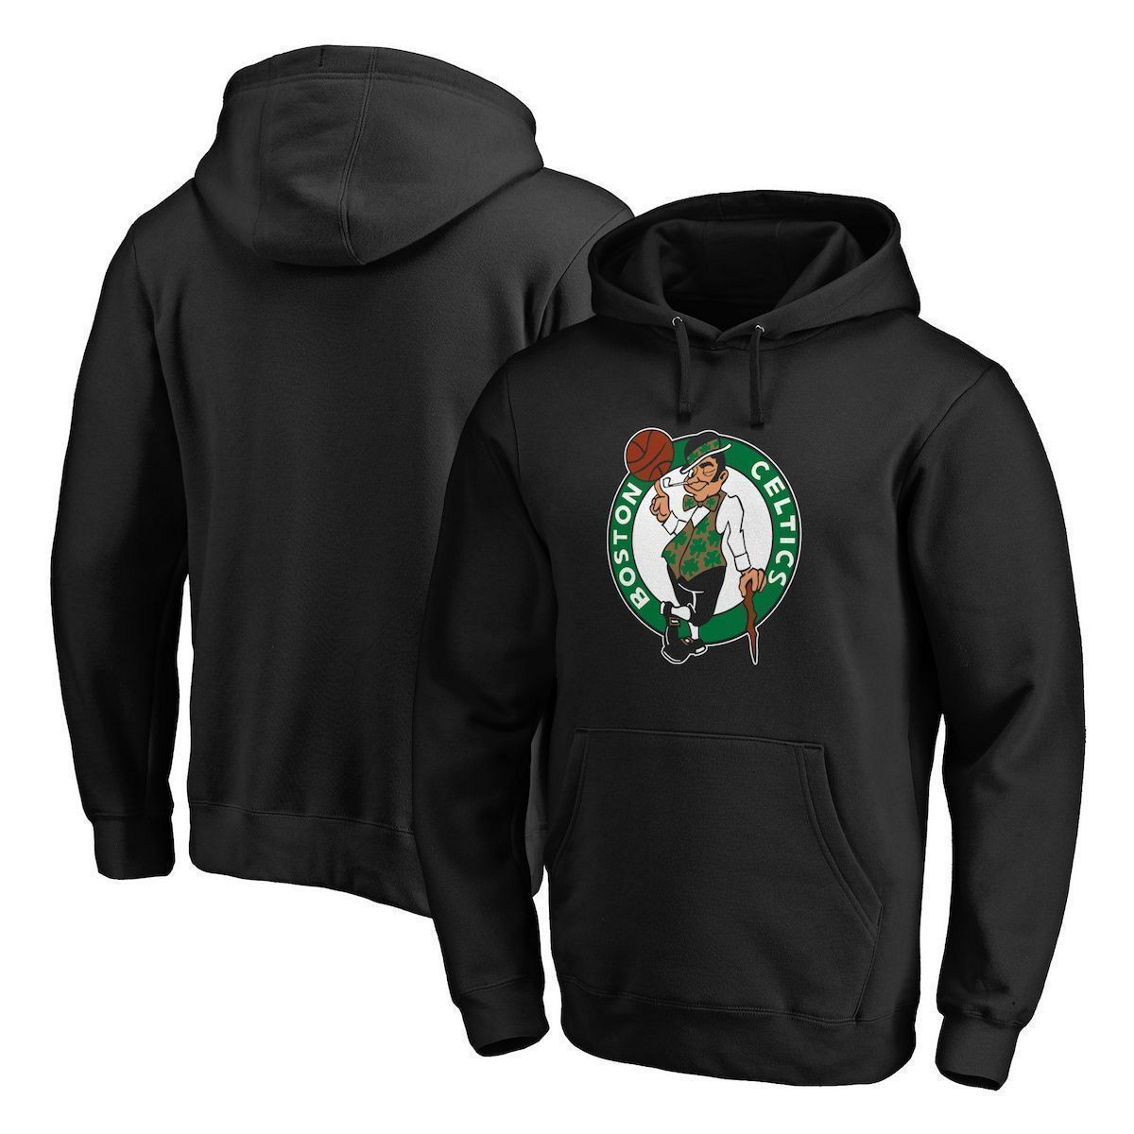 Fanatics Branded Men's Black Boston Celtics Icon Primary Logo Fitted Pullover Hoodie - Image 2 of 4